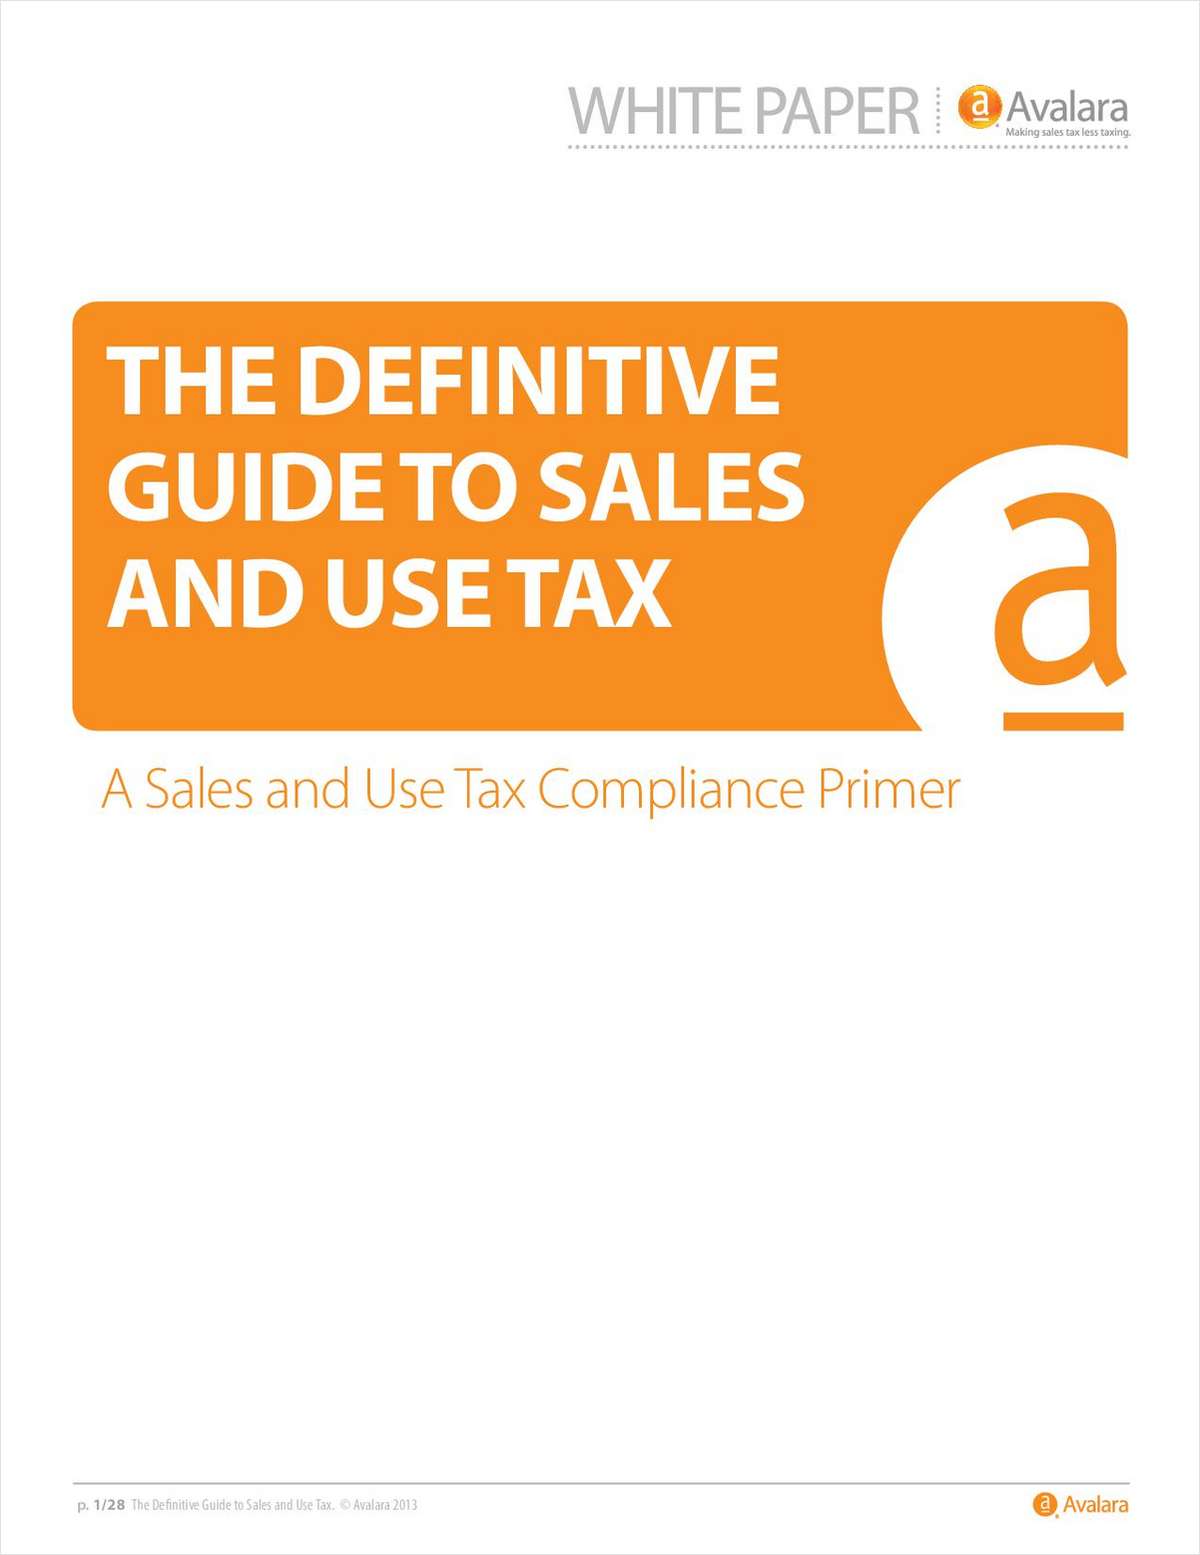 The Definitive Guide to Sales & Use Tax